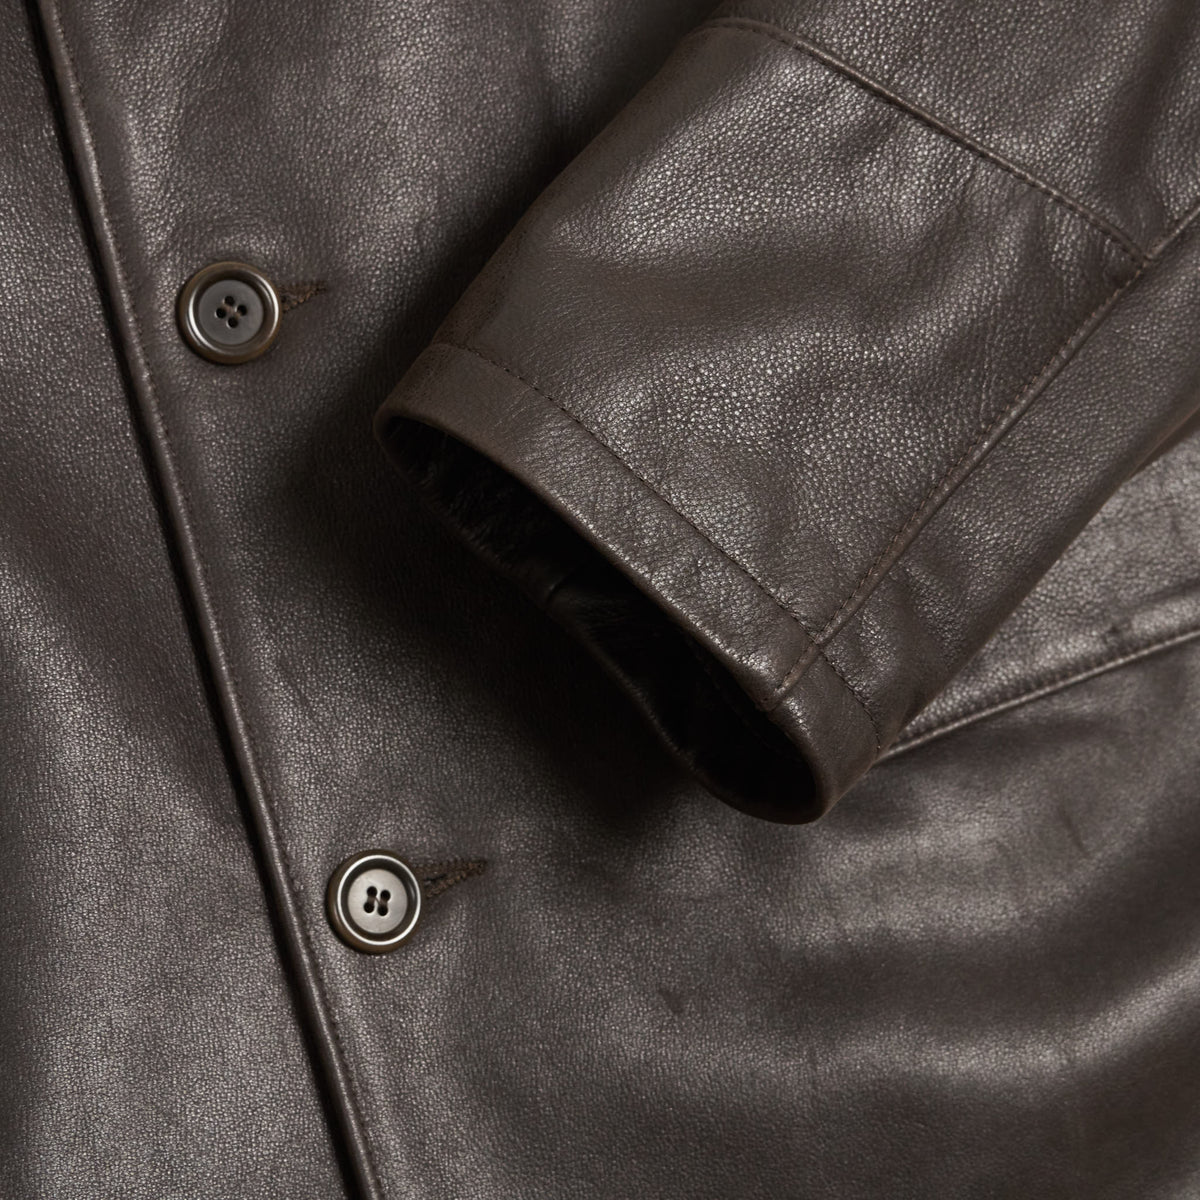 Stewart Leather Car Coat Removable Shearling Collar